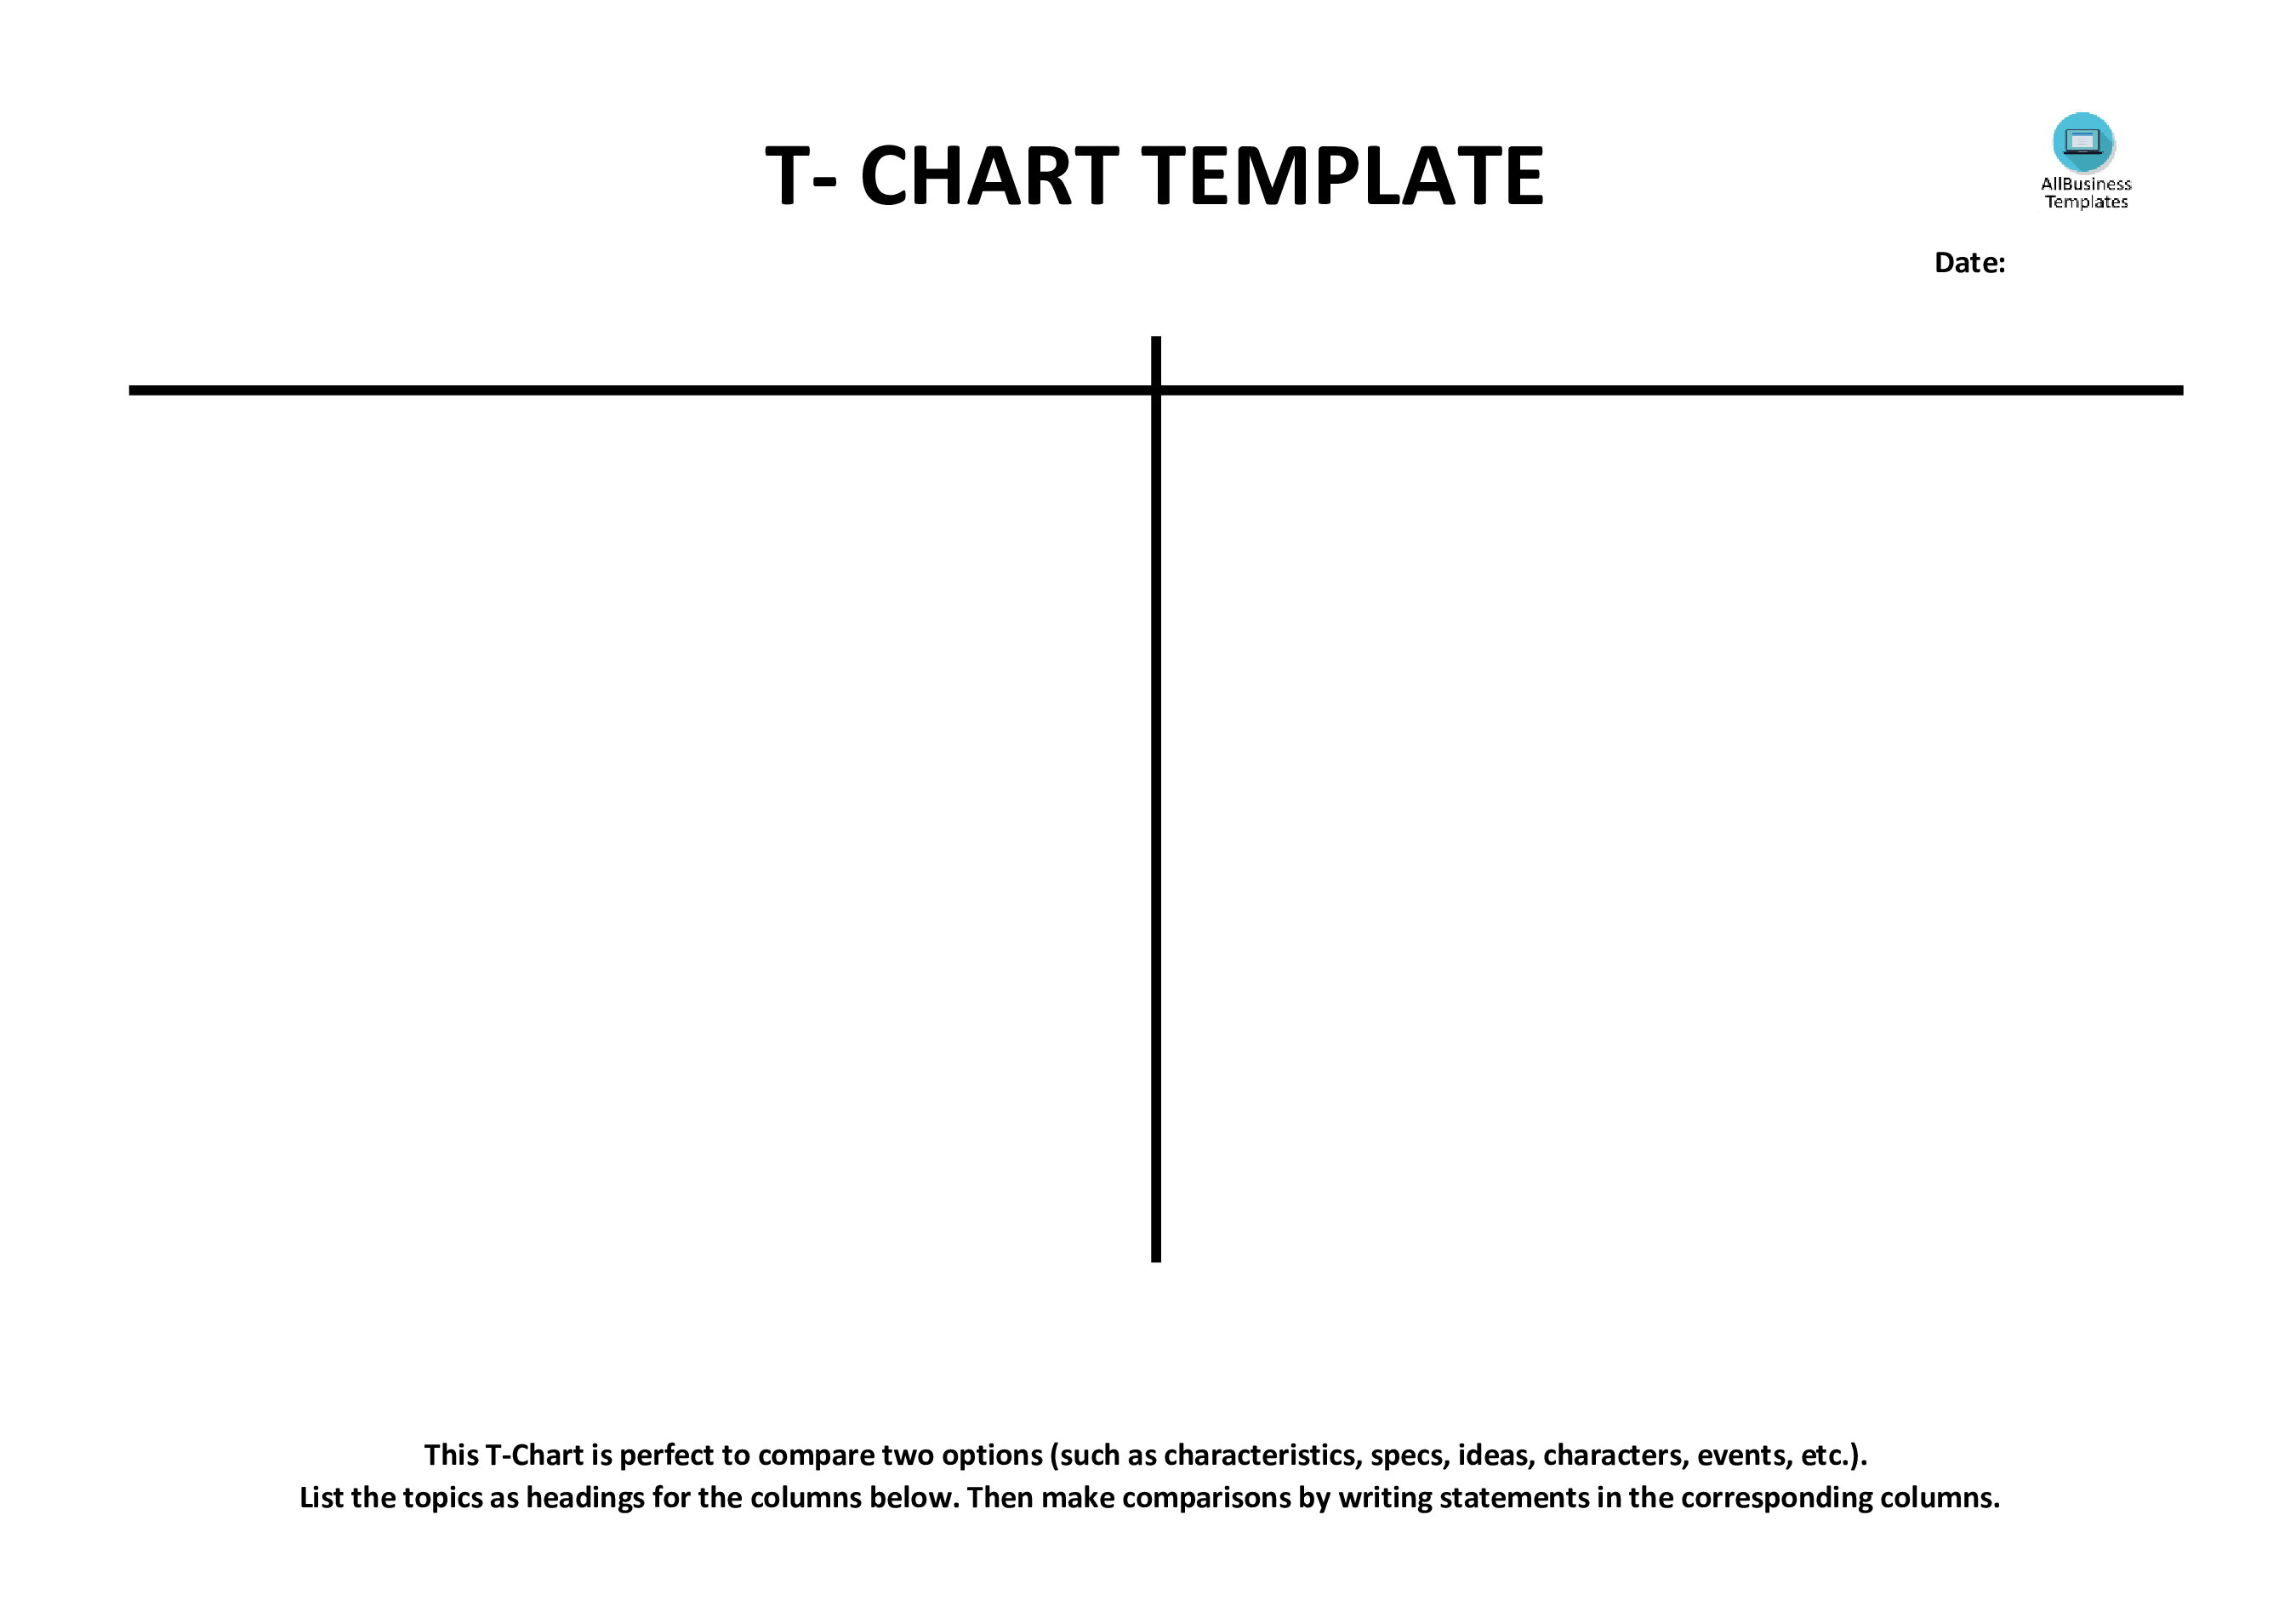 t-chart-example-blank-templates-at-allbusinesstemplates